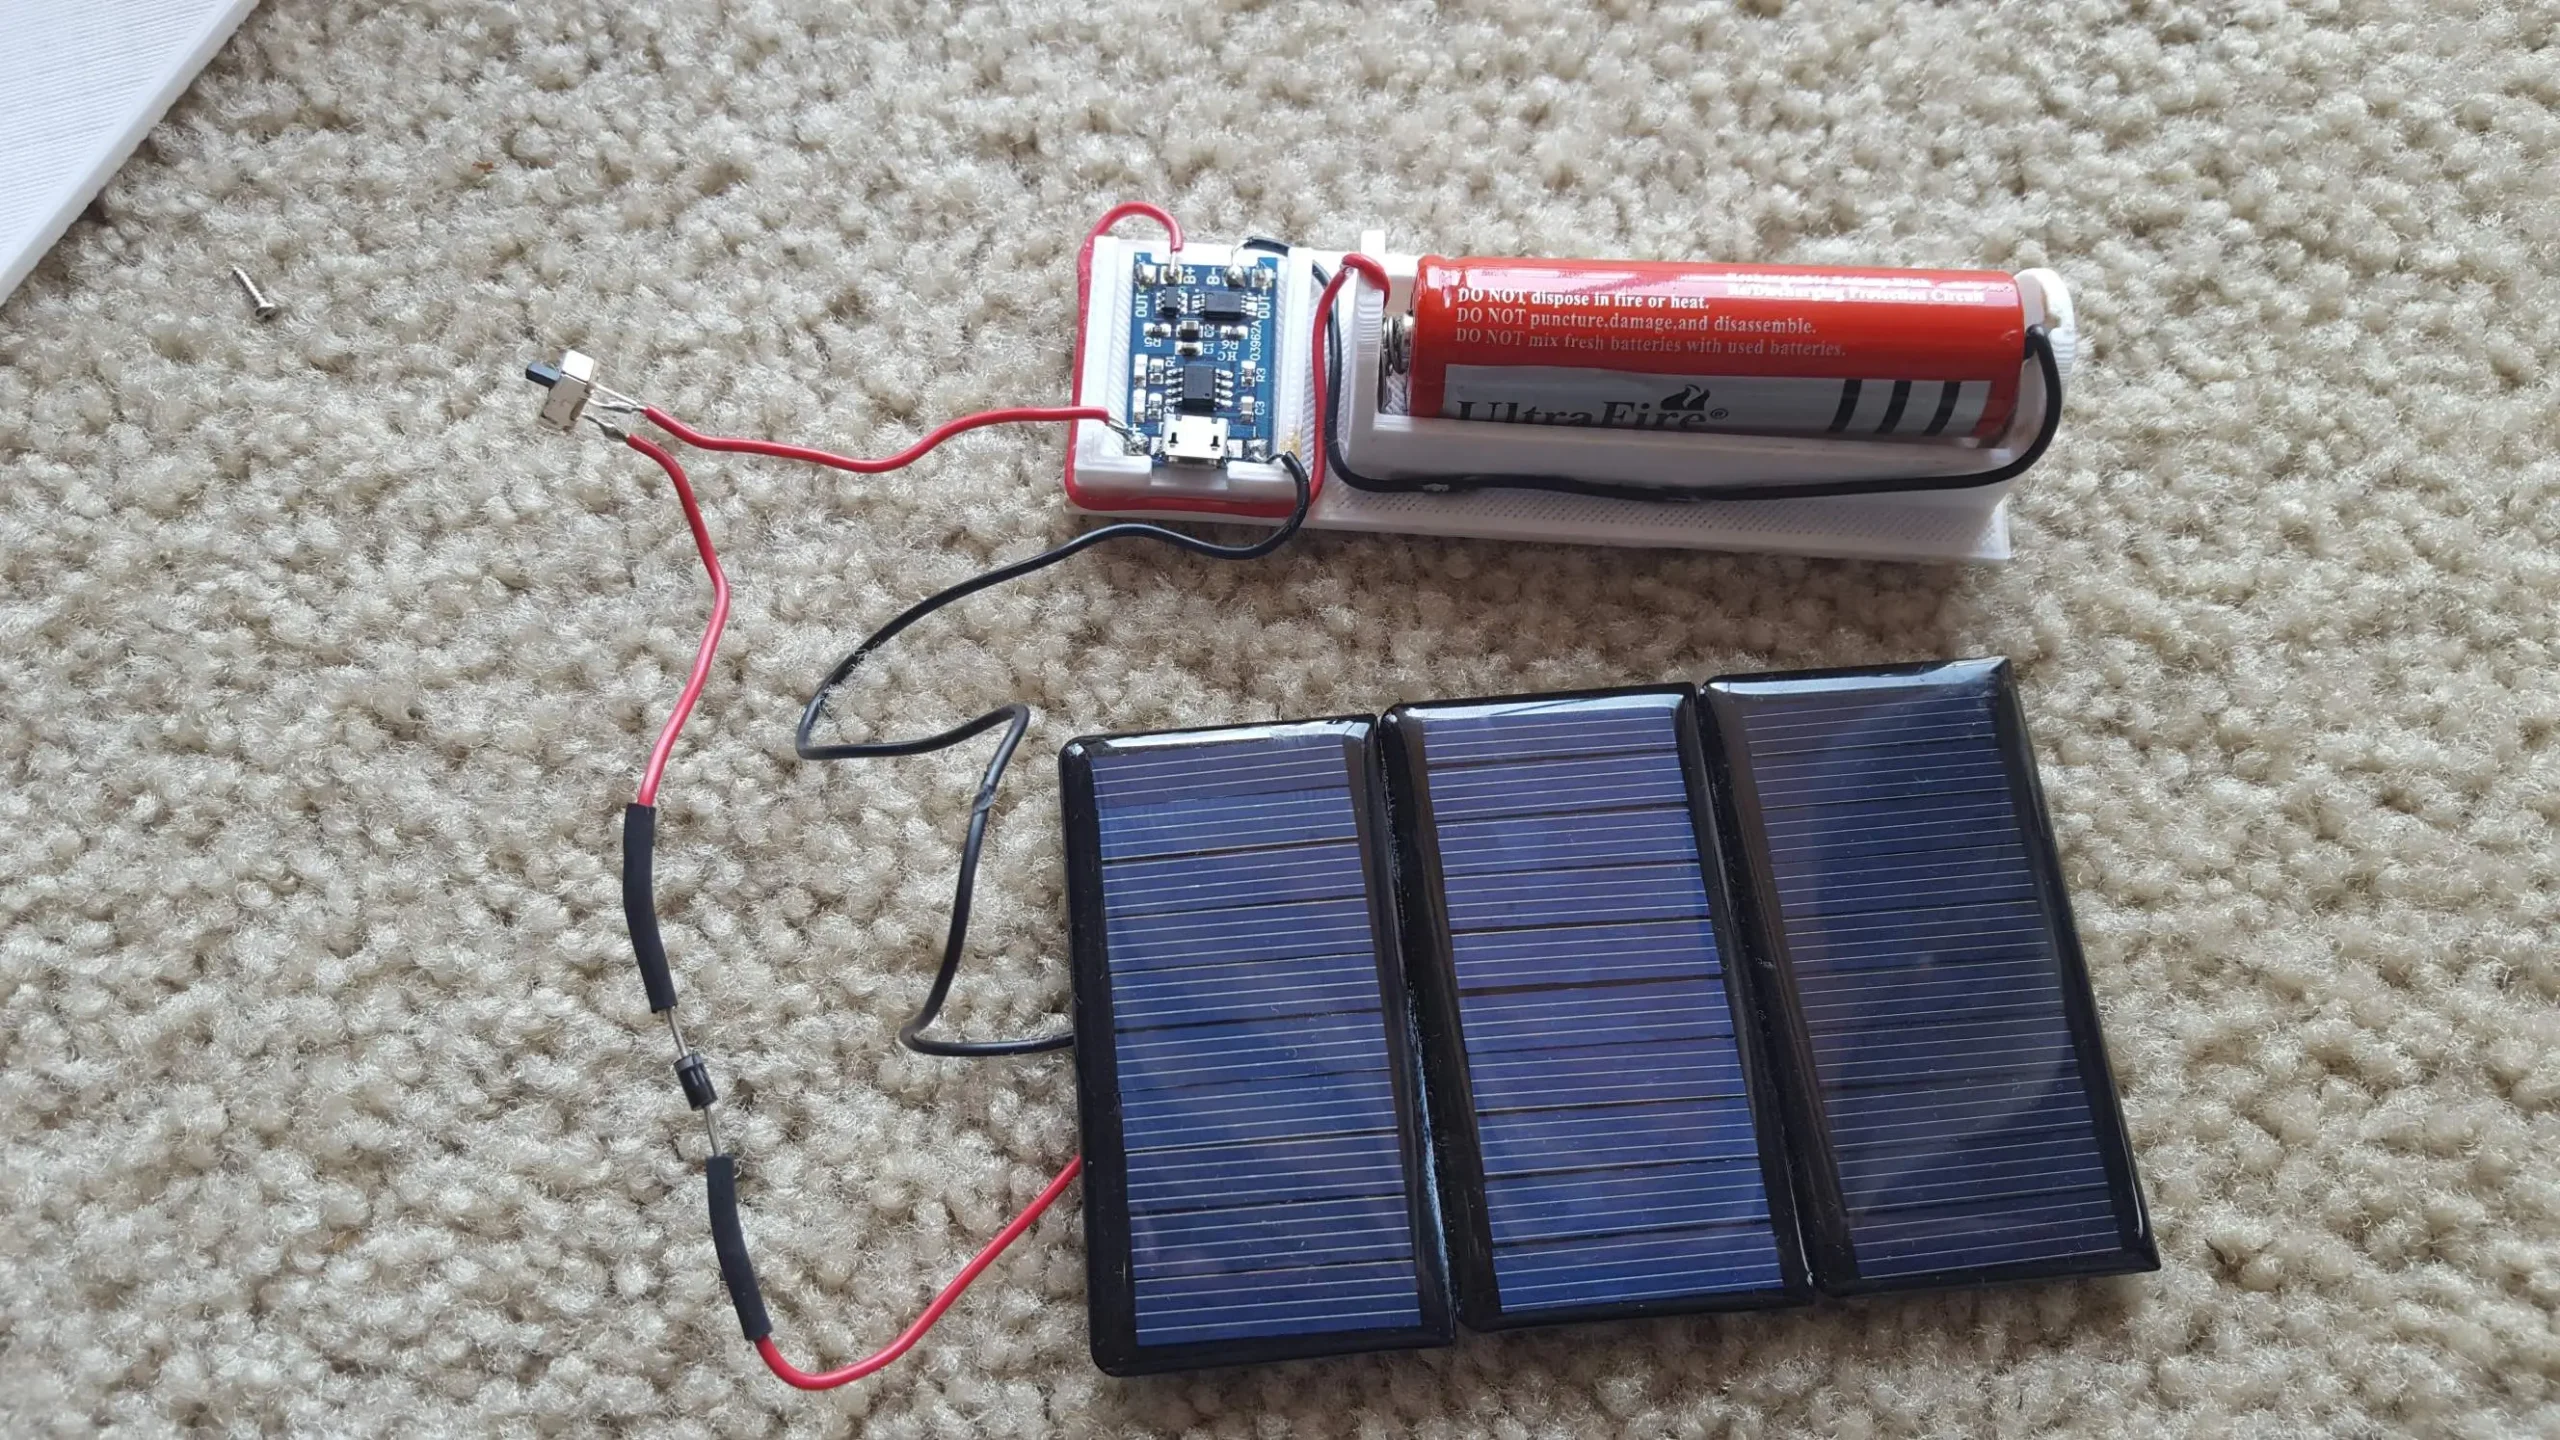 charge 18650 with solar panel - Can rechargeable batteries be charged by solar panels